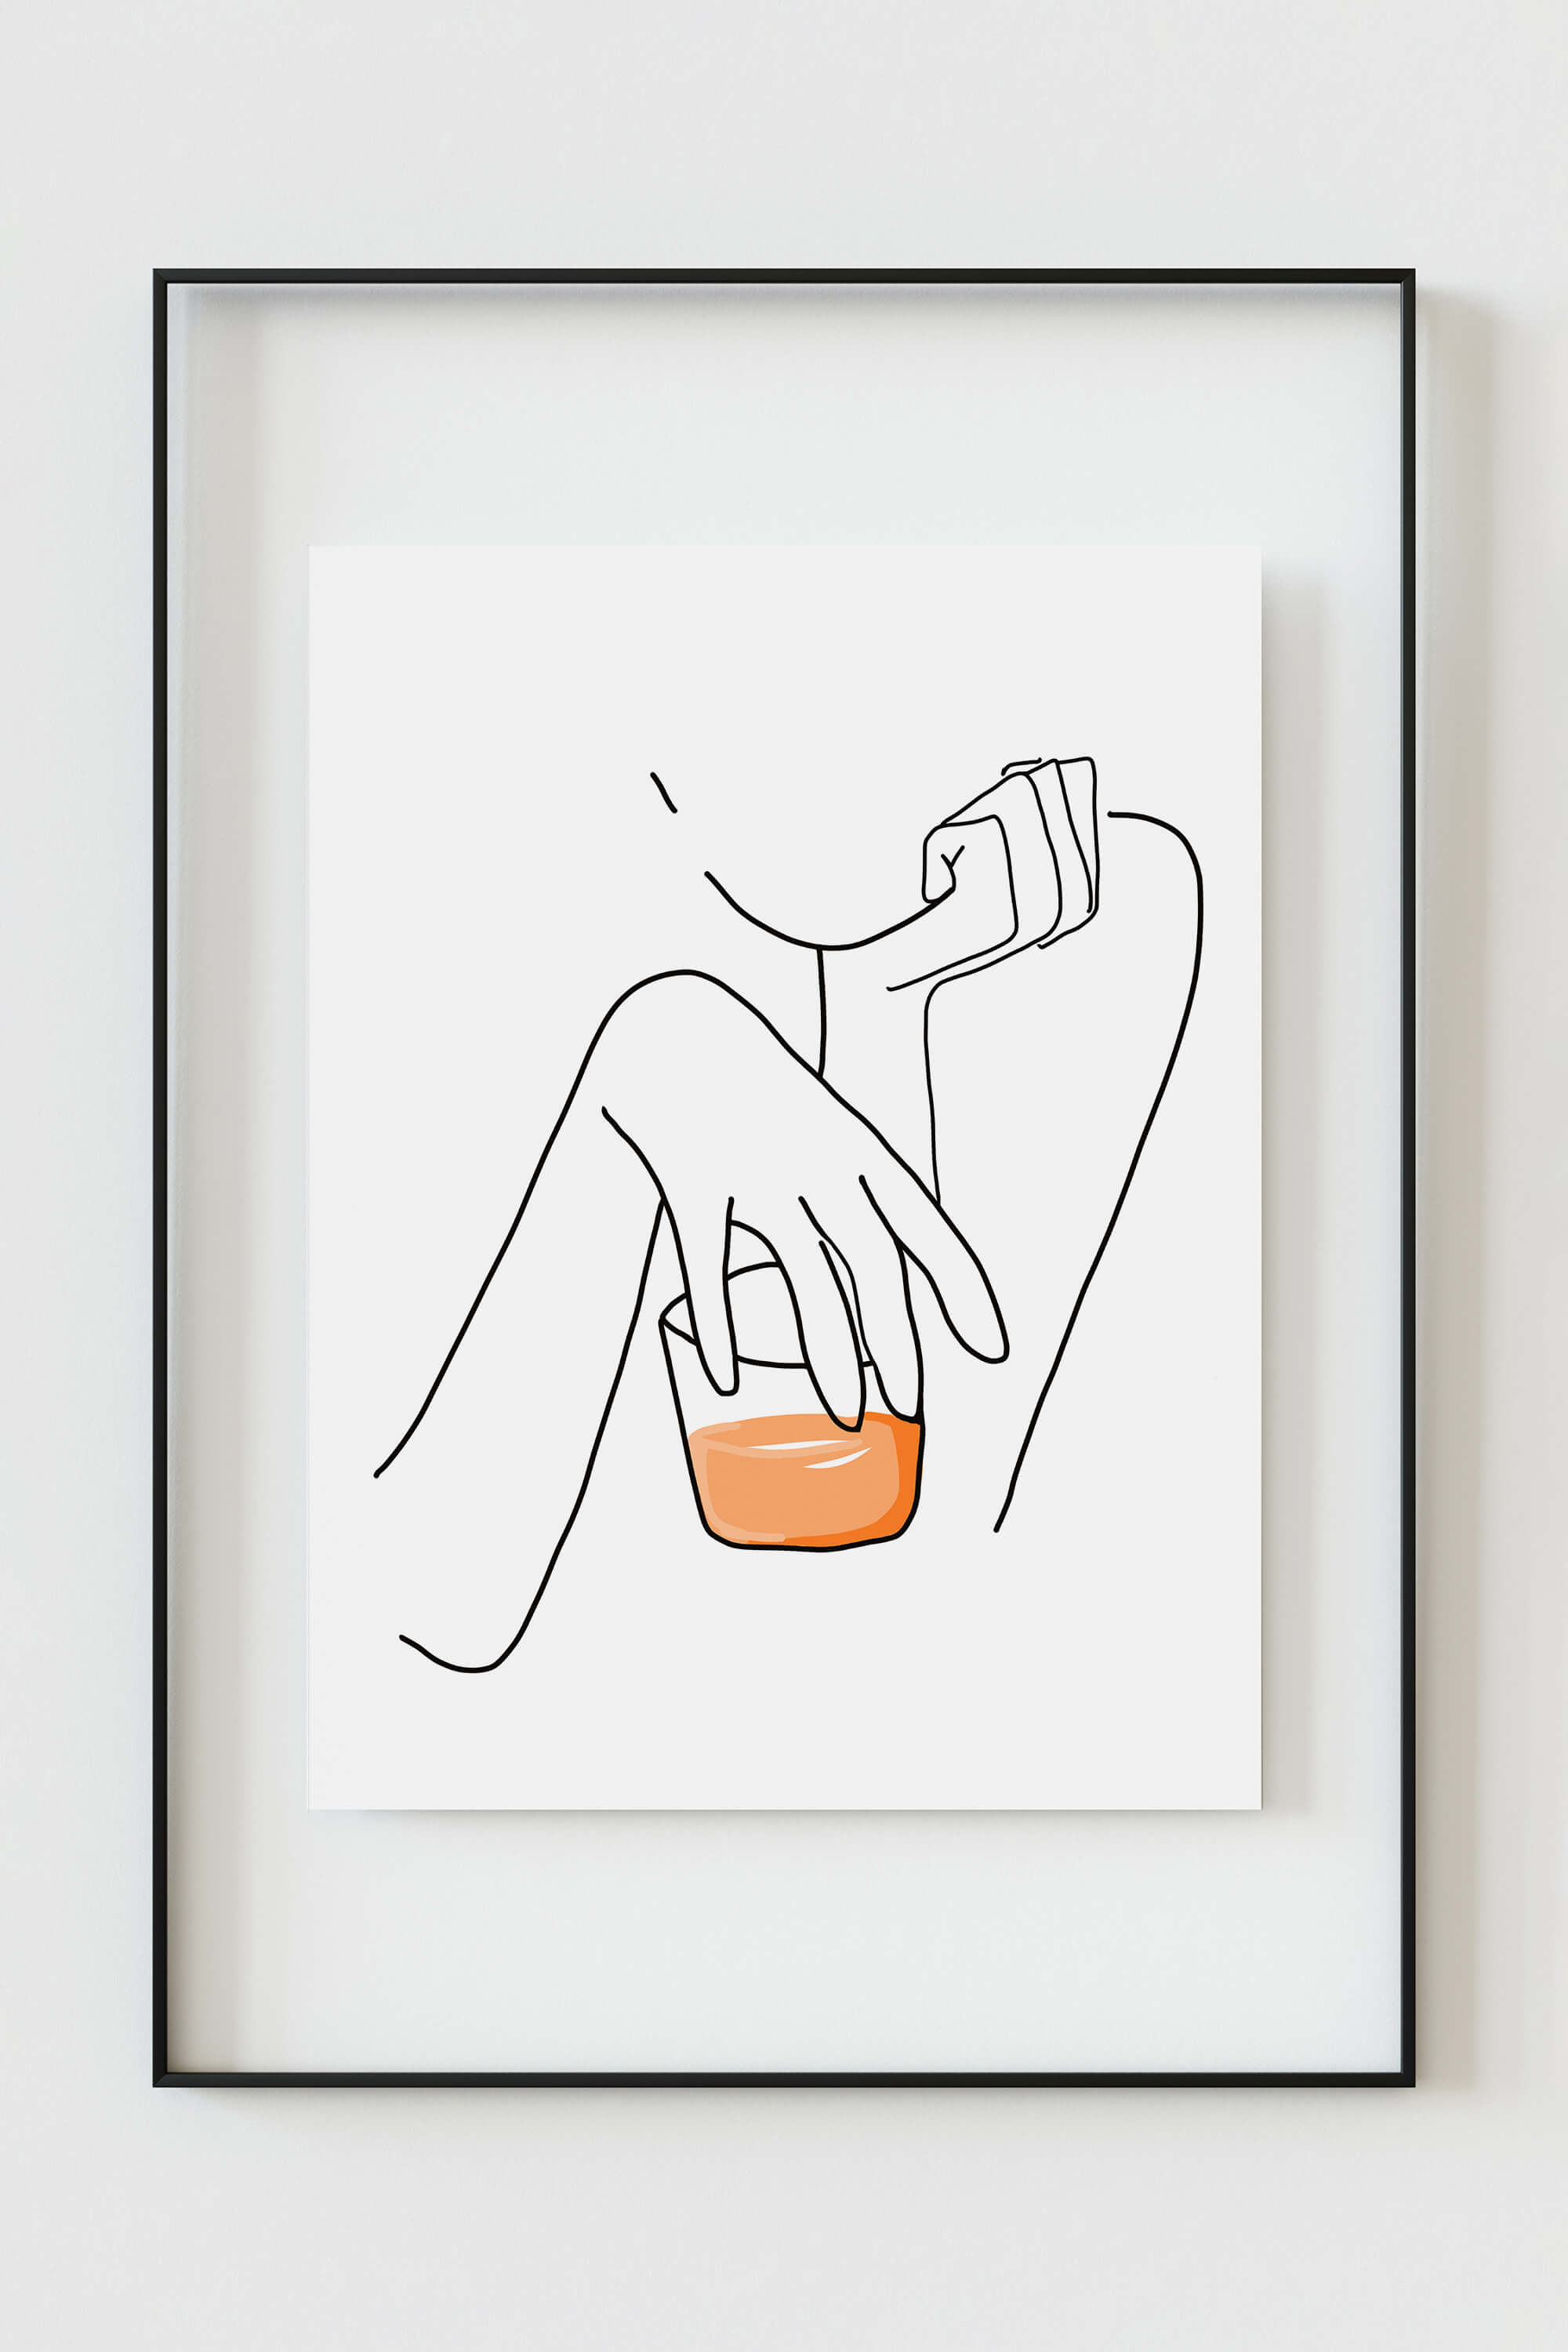 Sophisticated whiskey line art print, perfect for enhancing any bar or lounge area with chic decor.